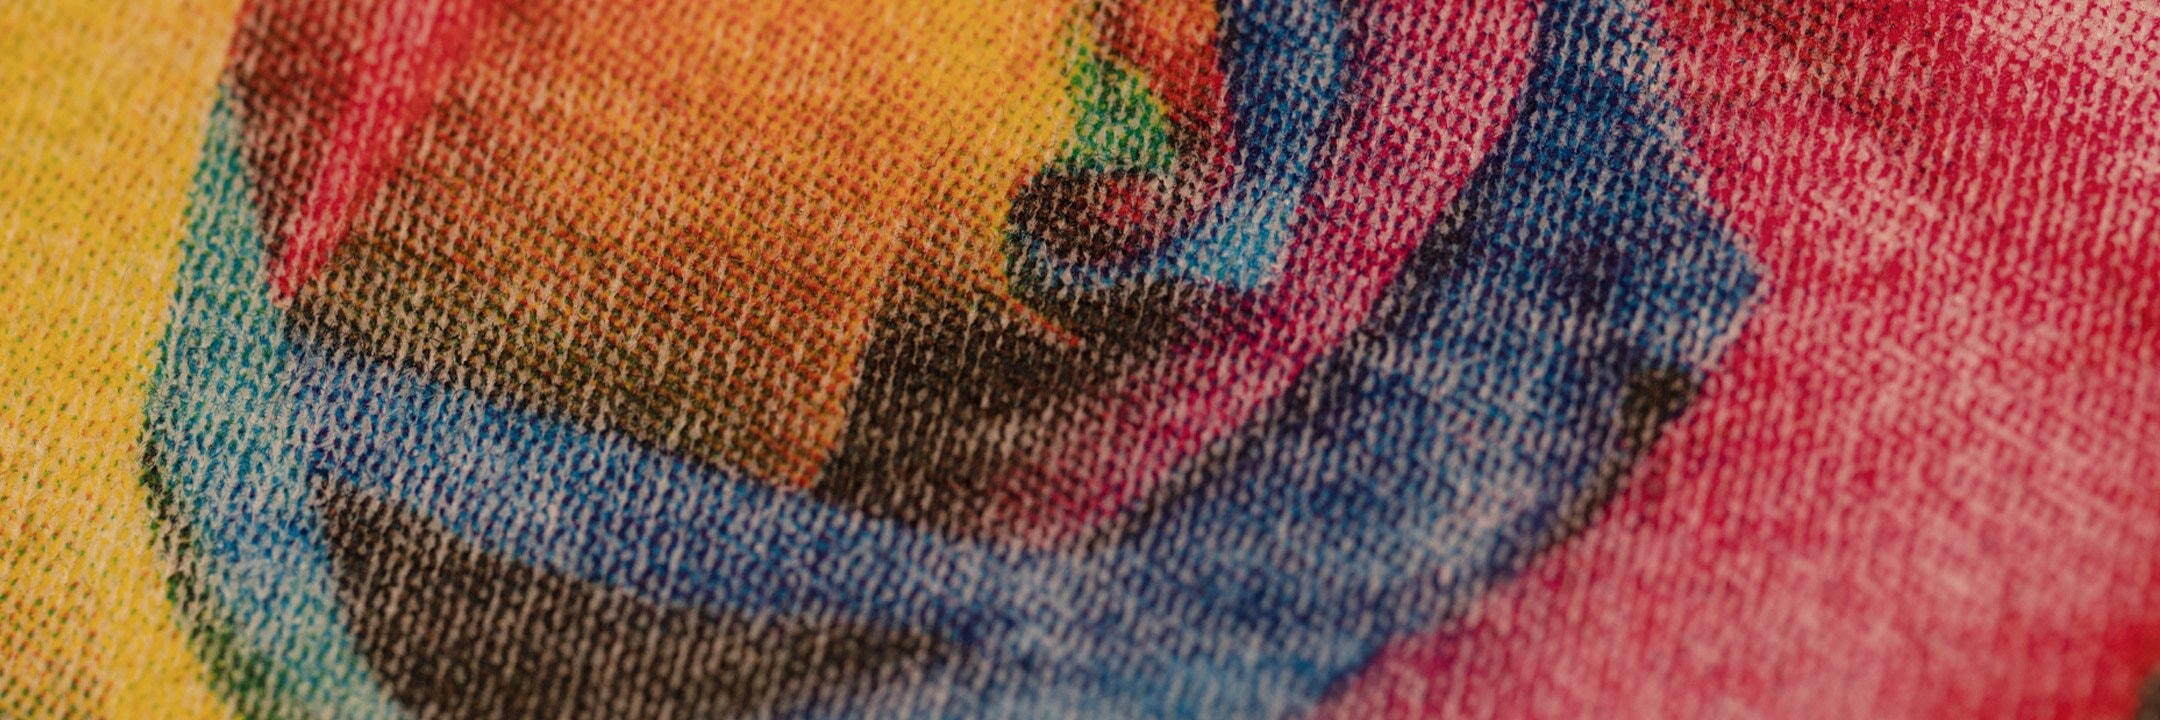 Close Up Of Screen Printing On Shirts And Textiles Stock Photo